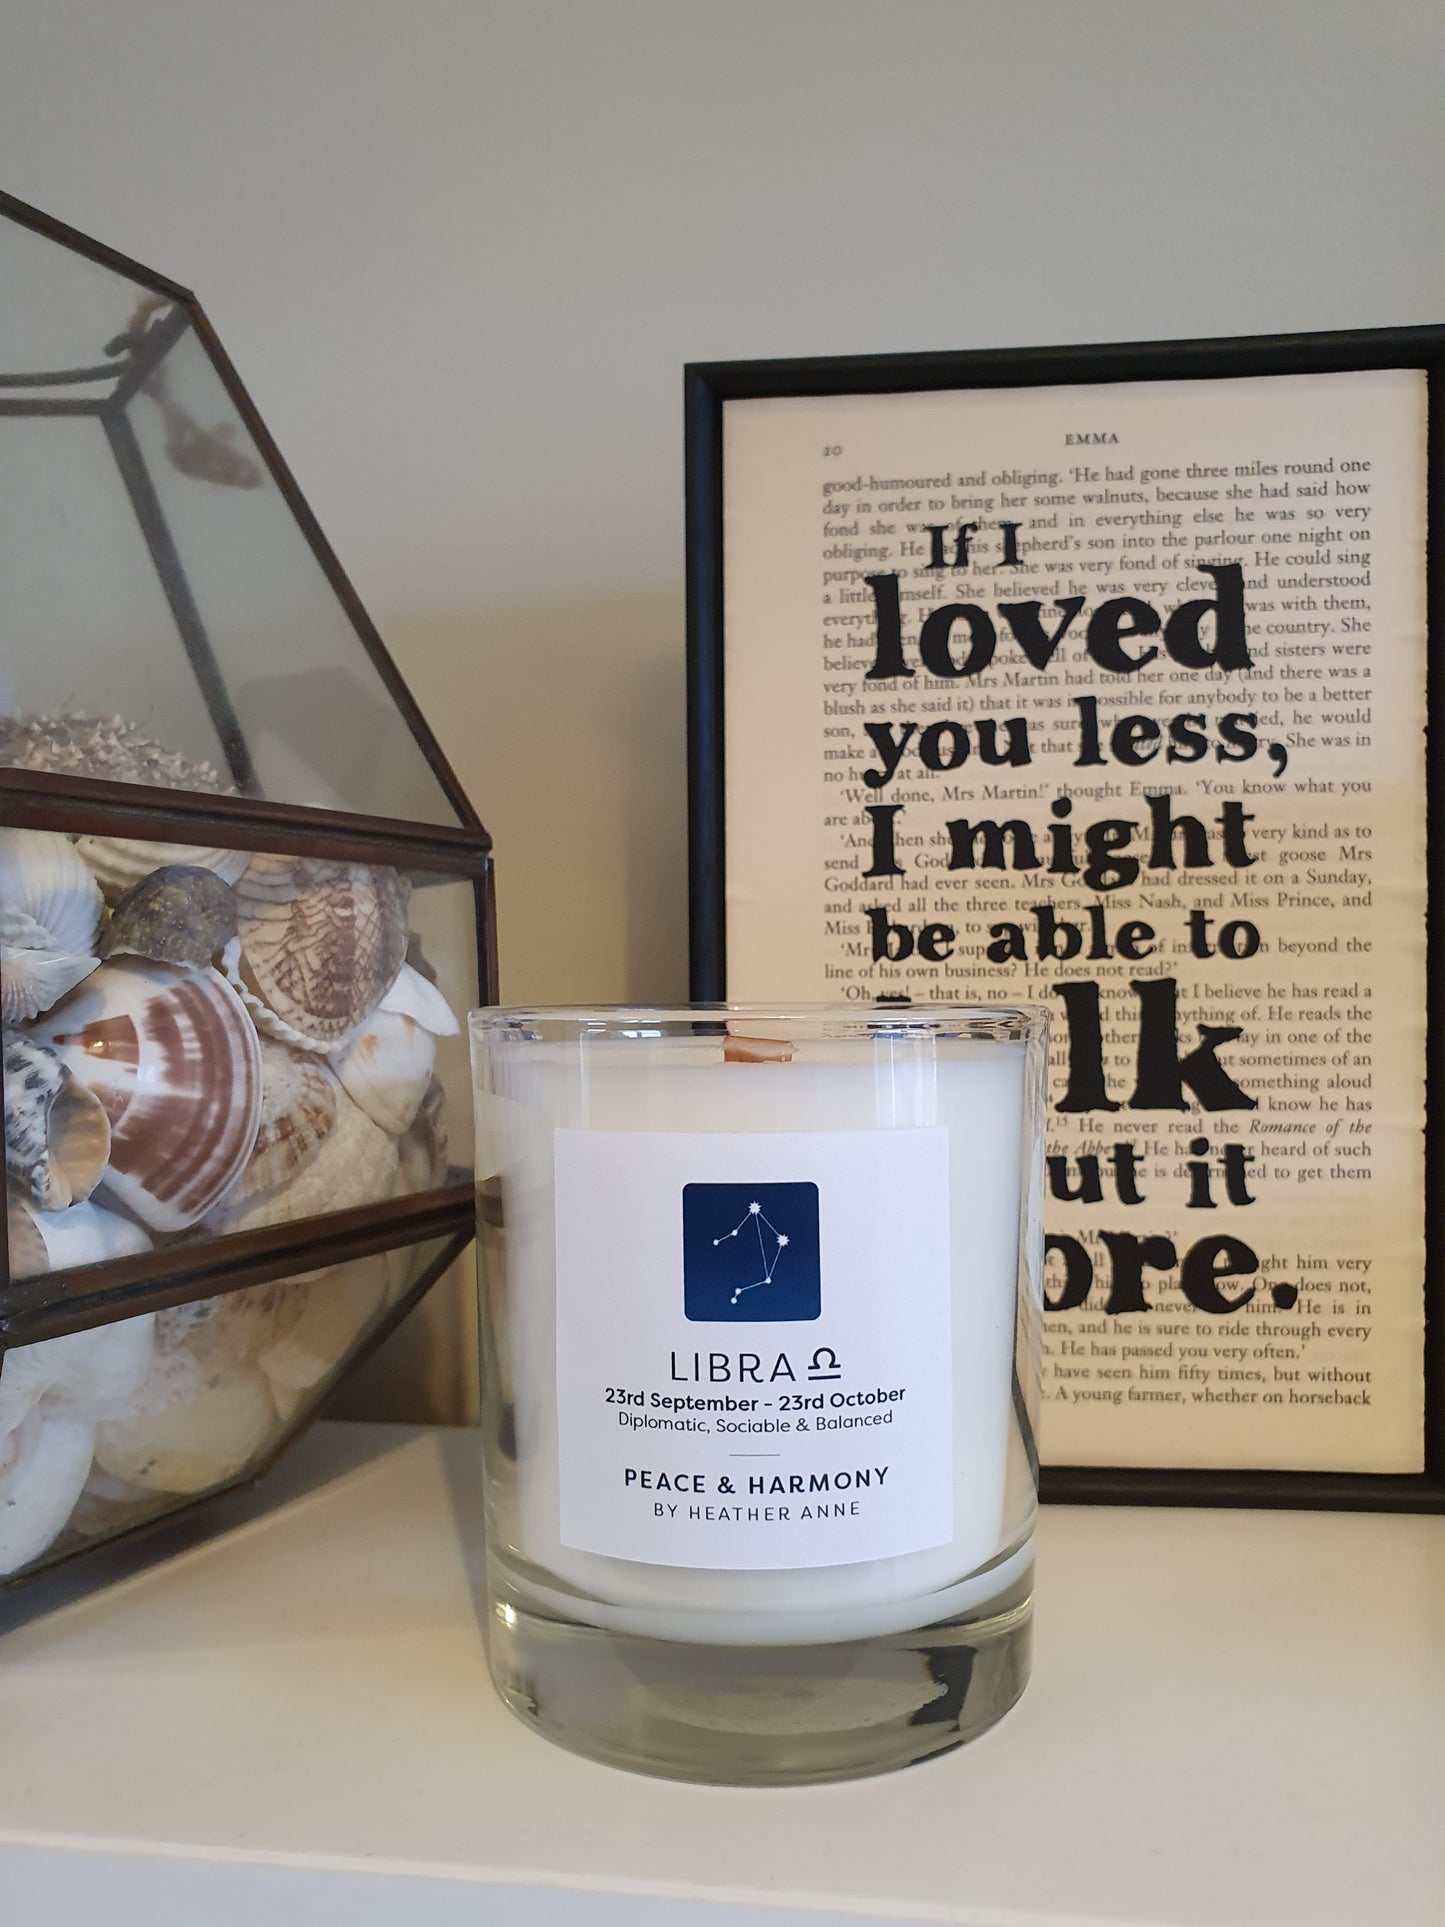 Libra - Peace & Harmony. 23rd September - 23rd October Woodwick Candle